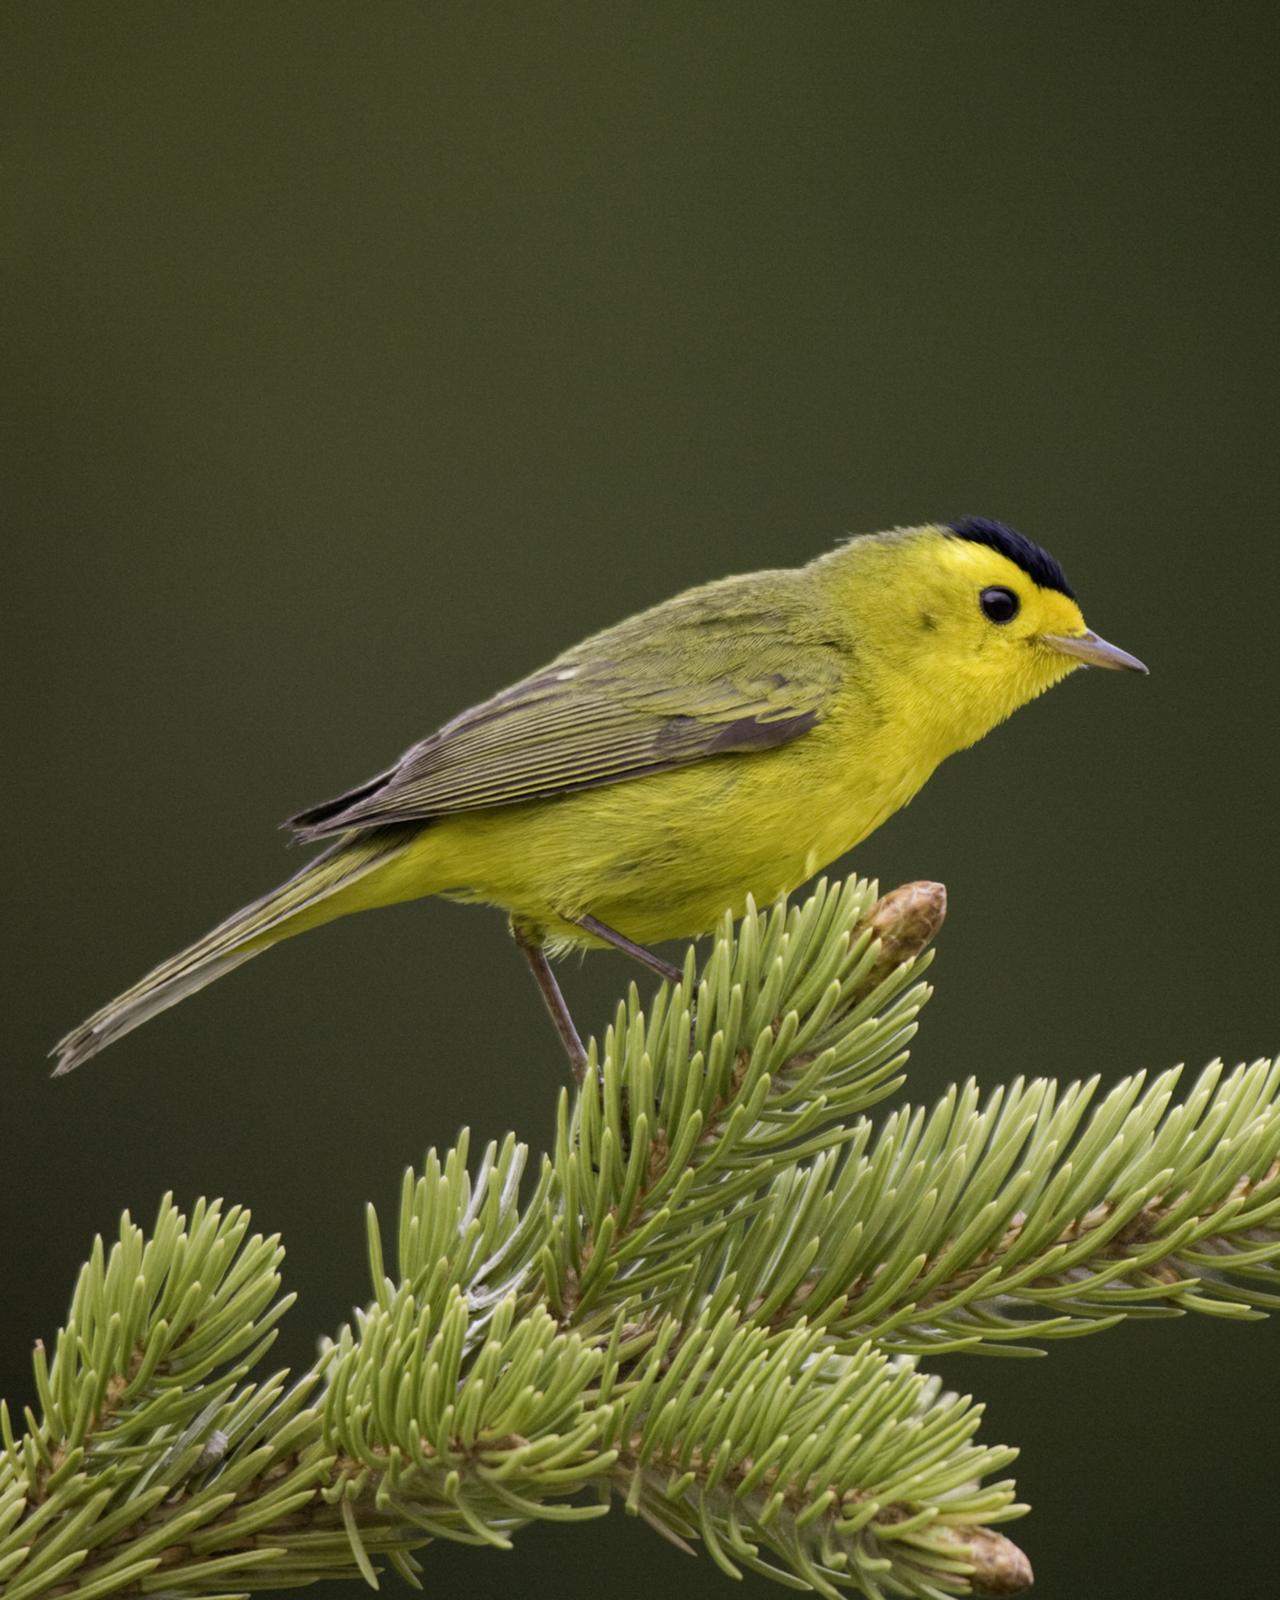 Wilson's Warbler Photo by Mary Ann Melton